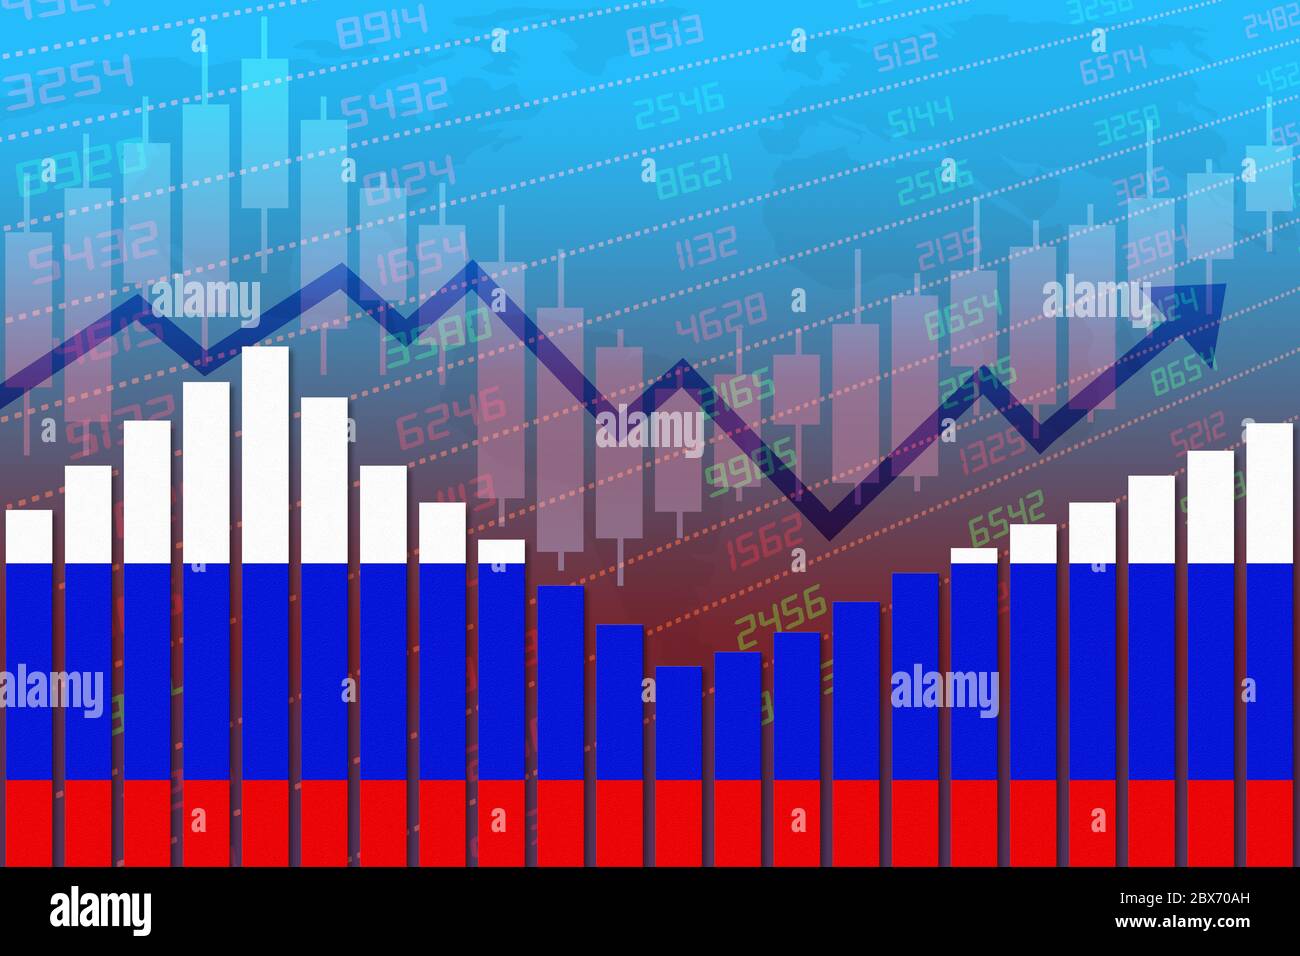 Flag of Russia on bar chart concept of economic recovery and business improving after crisis such as Covid-19 or other catastrophe as economy and busi Stock Photo